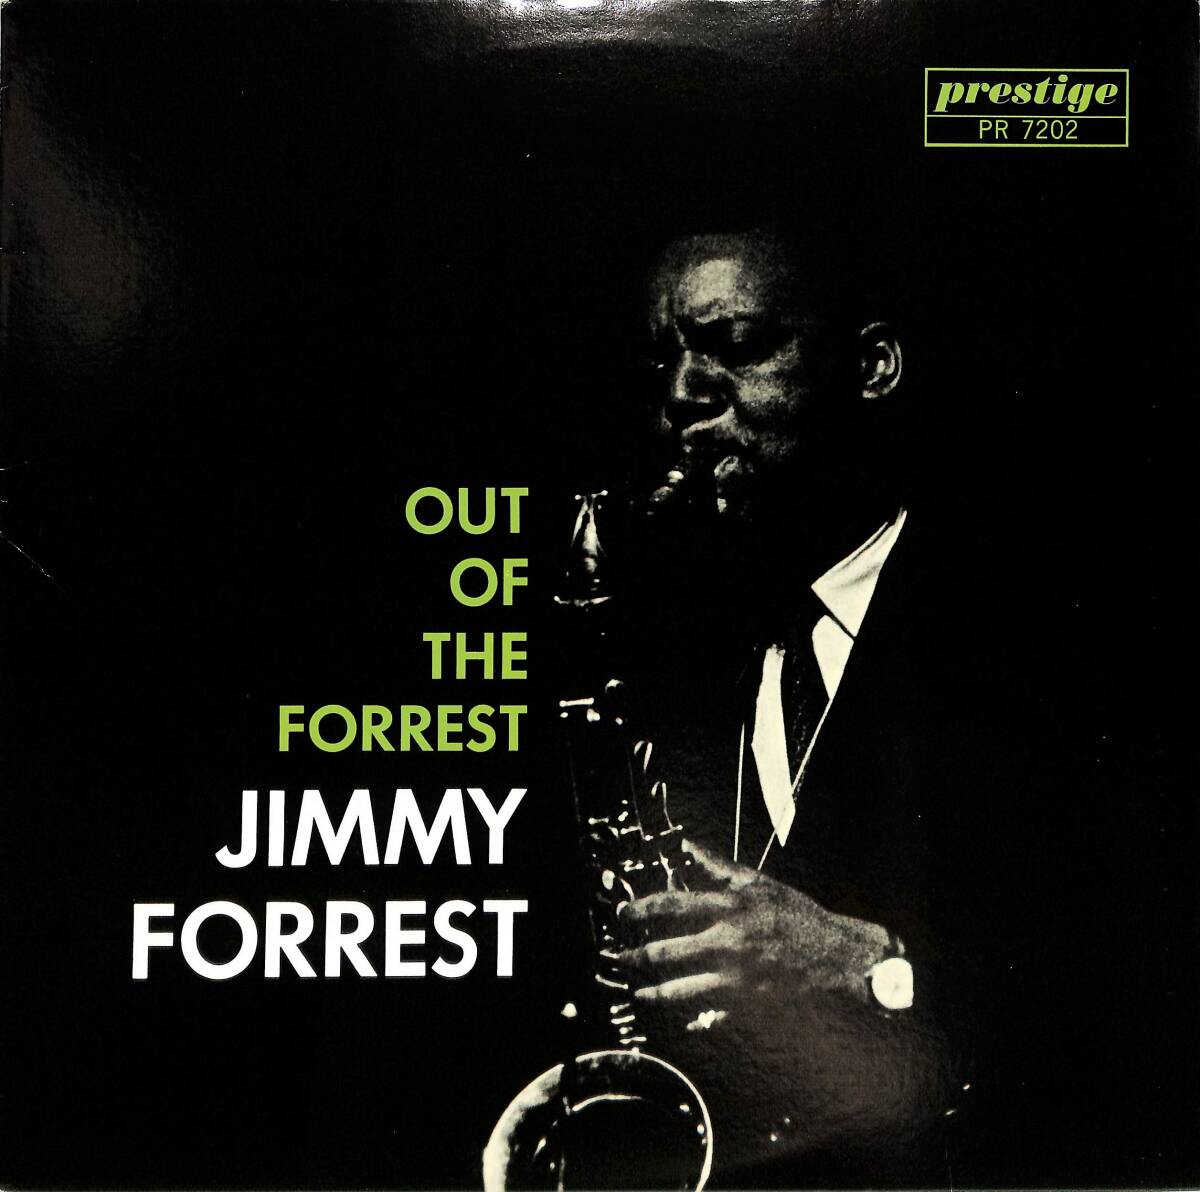 A00591378/LP/ジミー・フォレスト (JIMMY FORREST)「Out Of The Forrest」_画像1